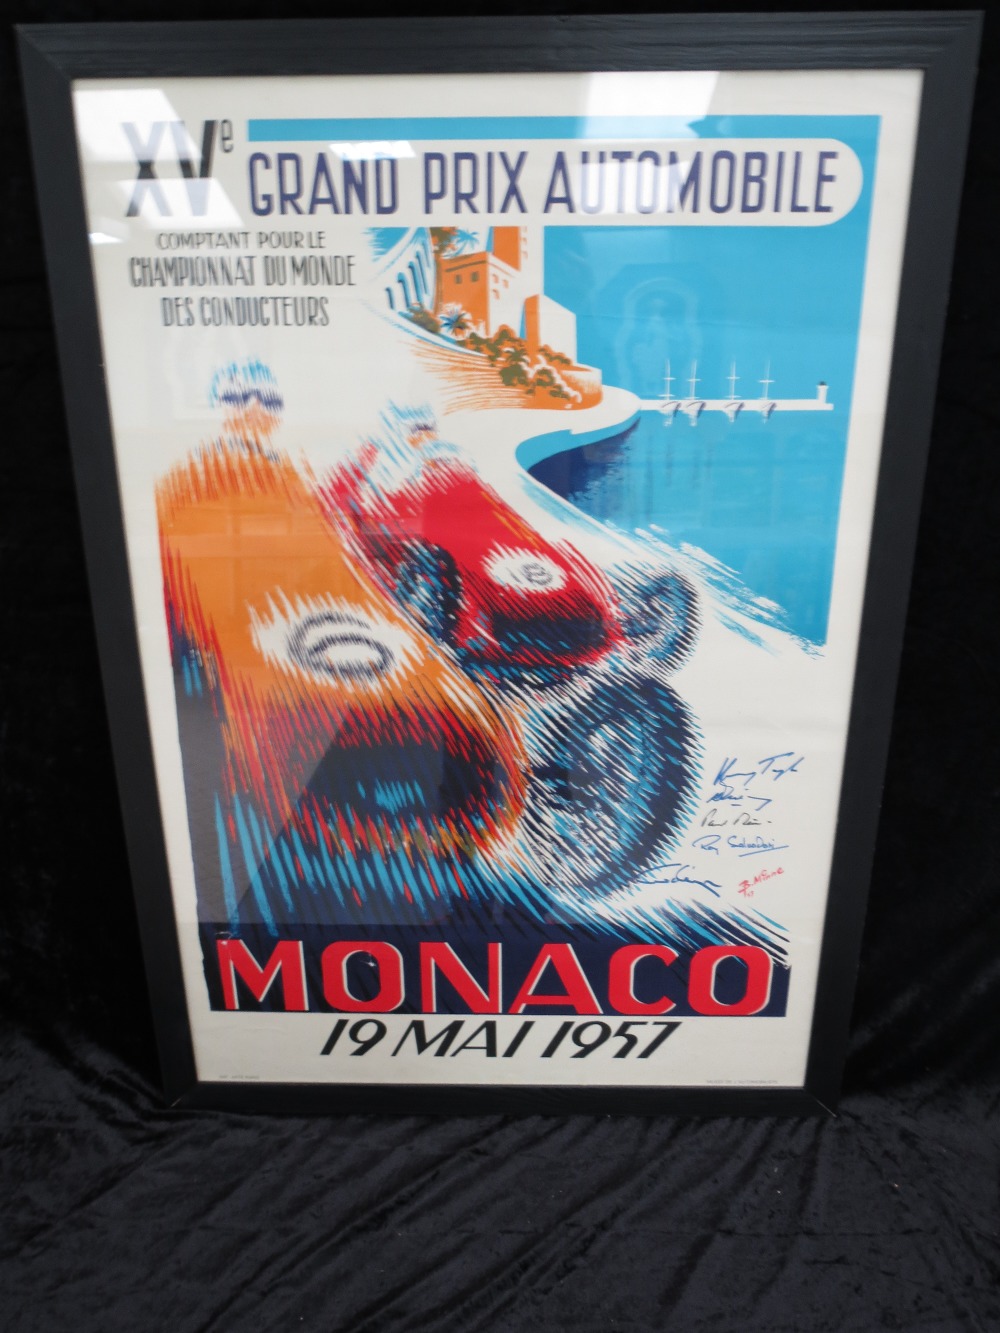 An original Grand Prix poster for Monaco 19th May 1957 containing various original drivers